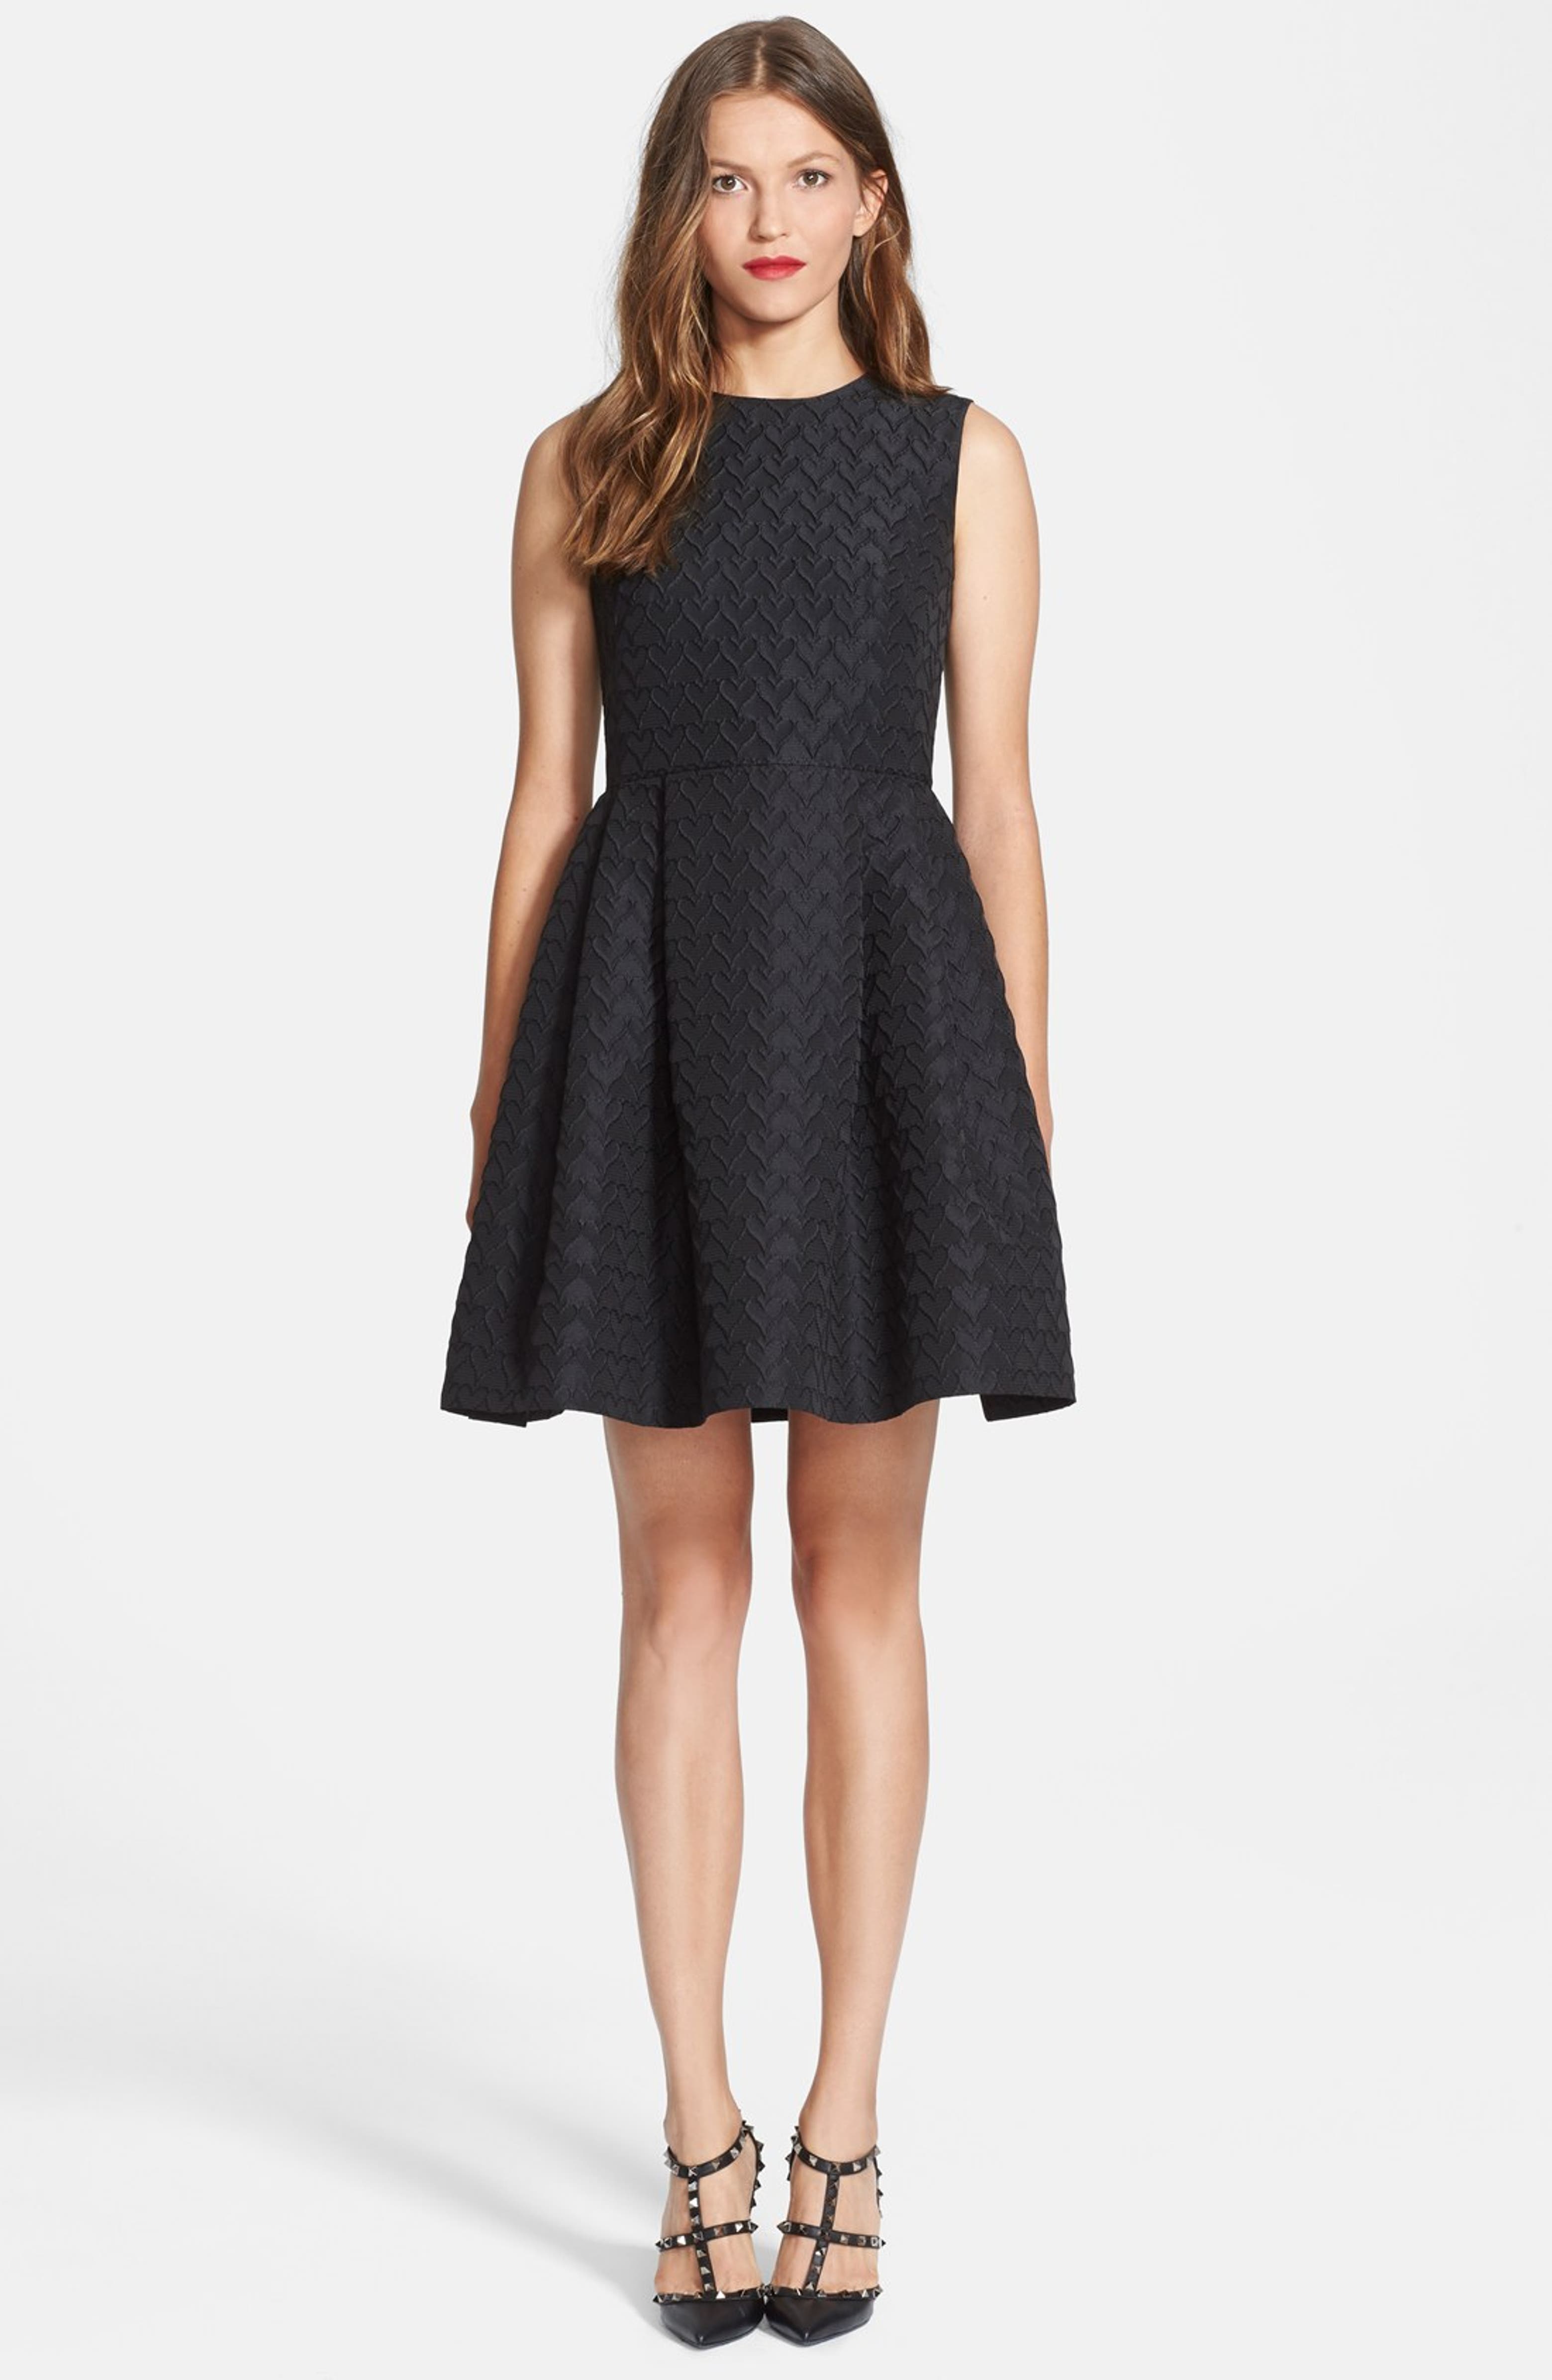 RED Valentino Jacquard Faille Fit & Flare Dress | Nordstrom